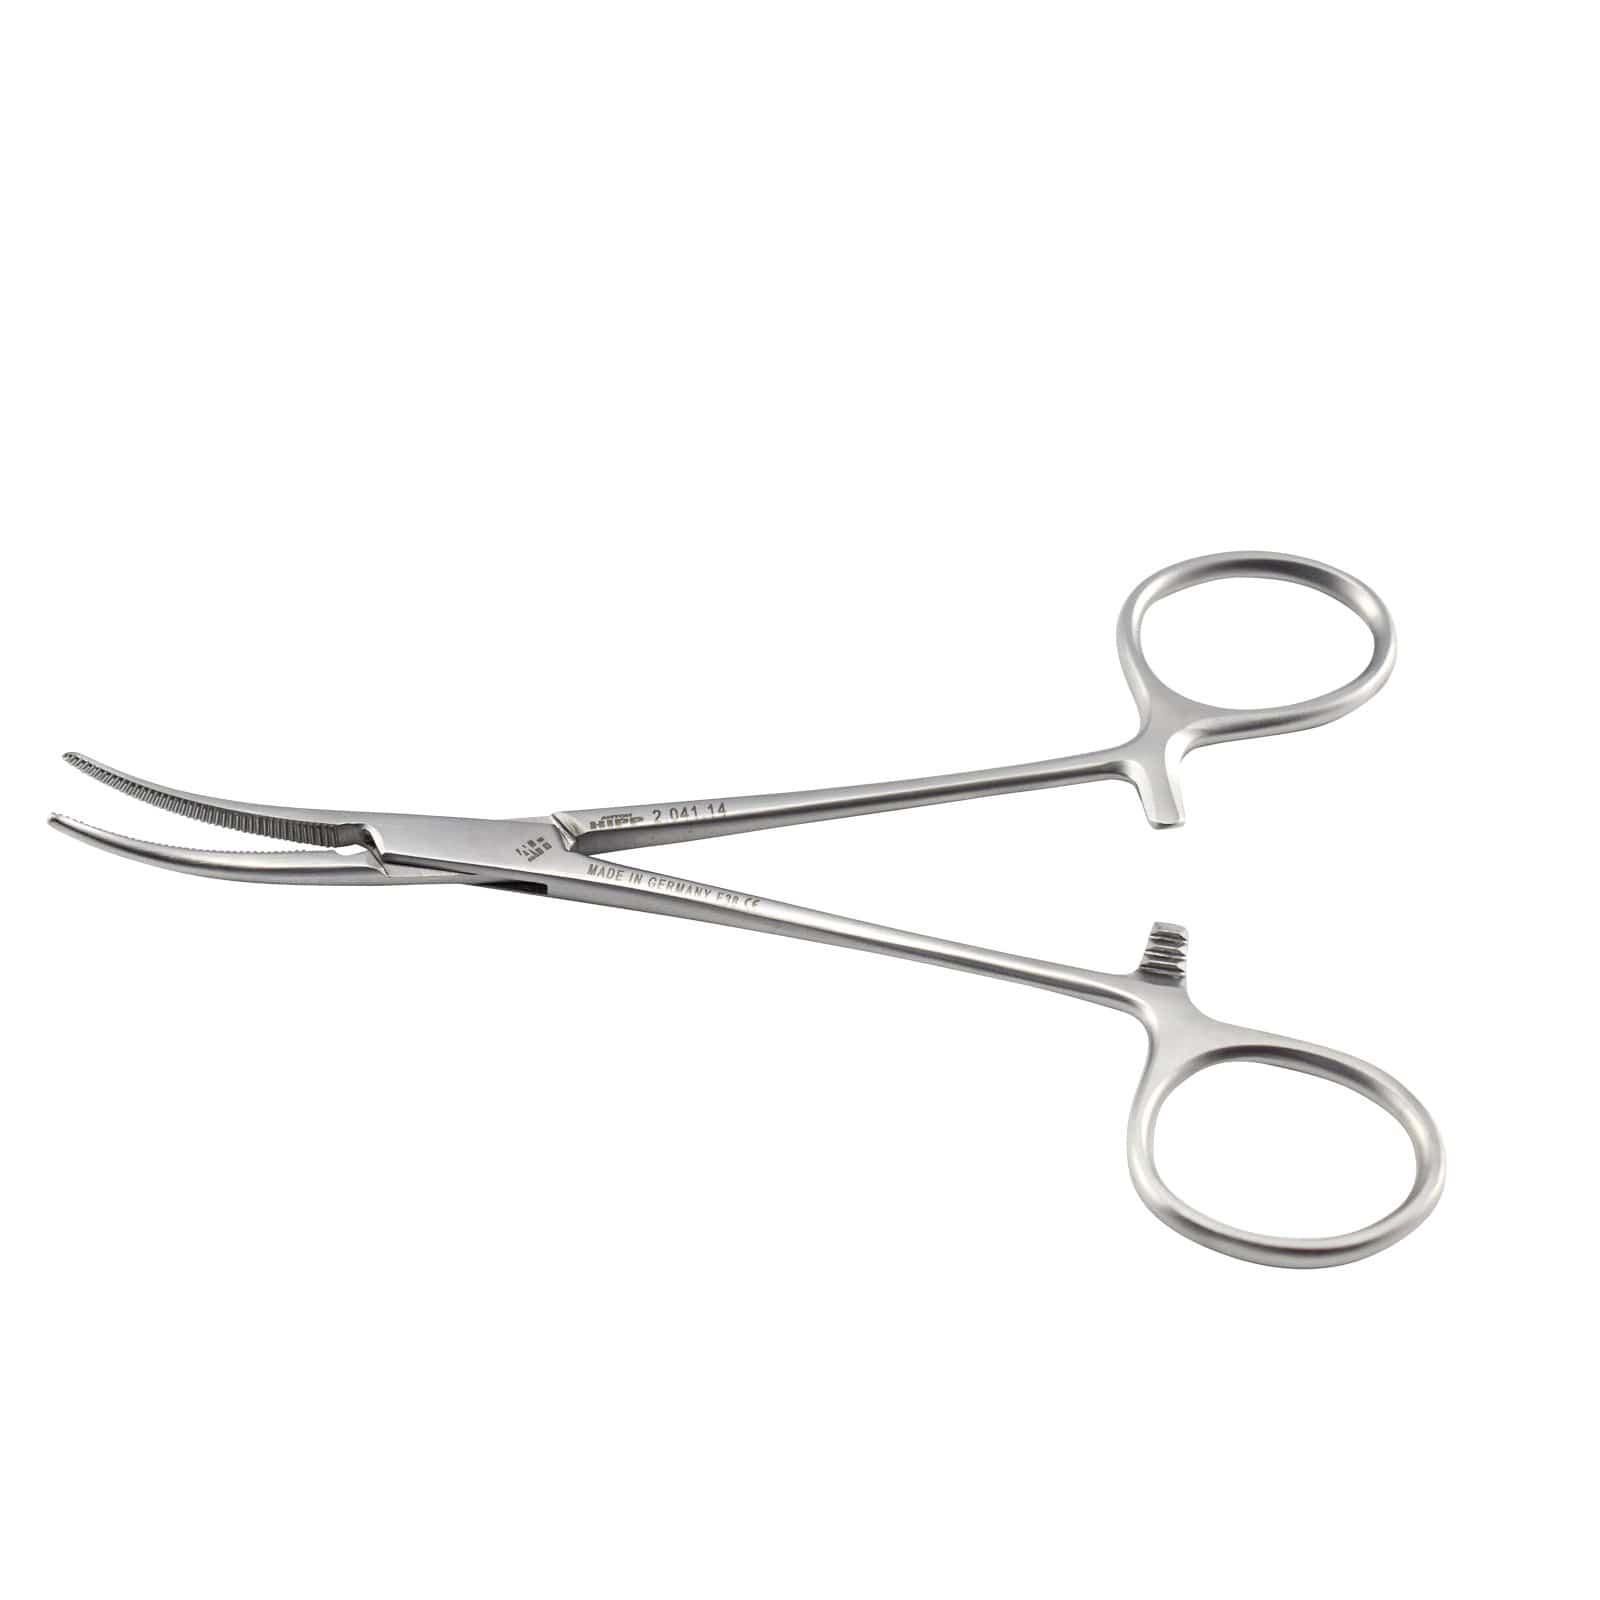 Hipp Surgical Instruments 14cm / Curved Hipp Crile Artery Forceps